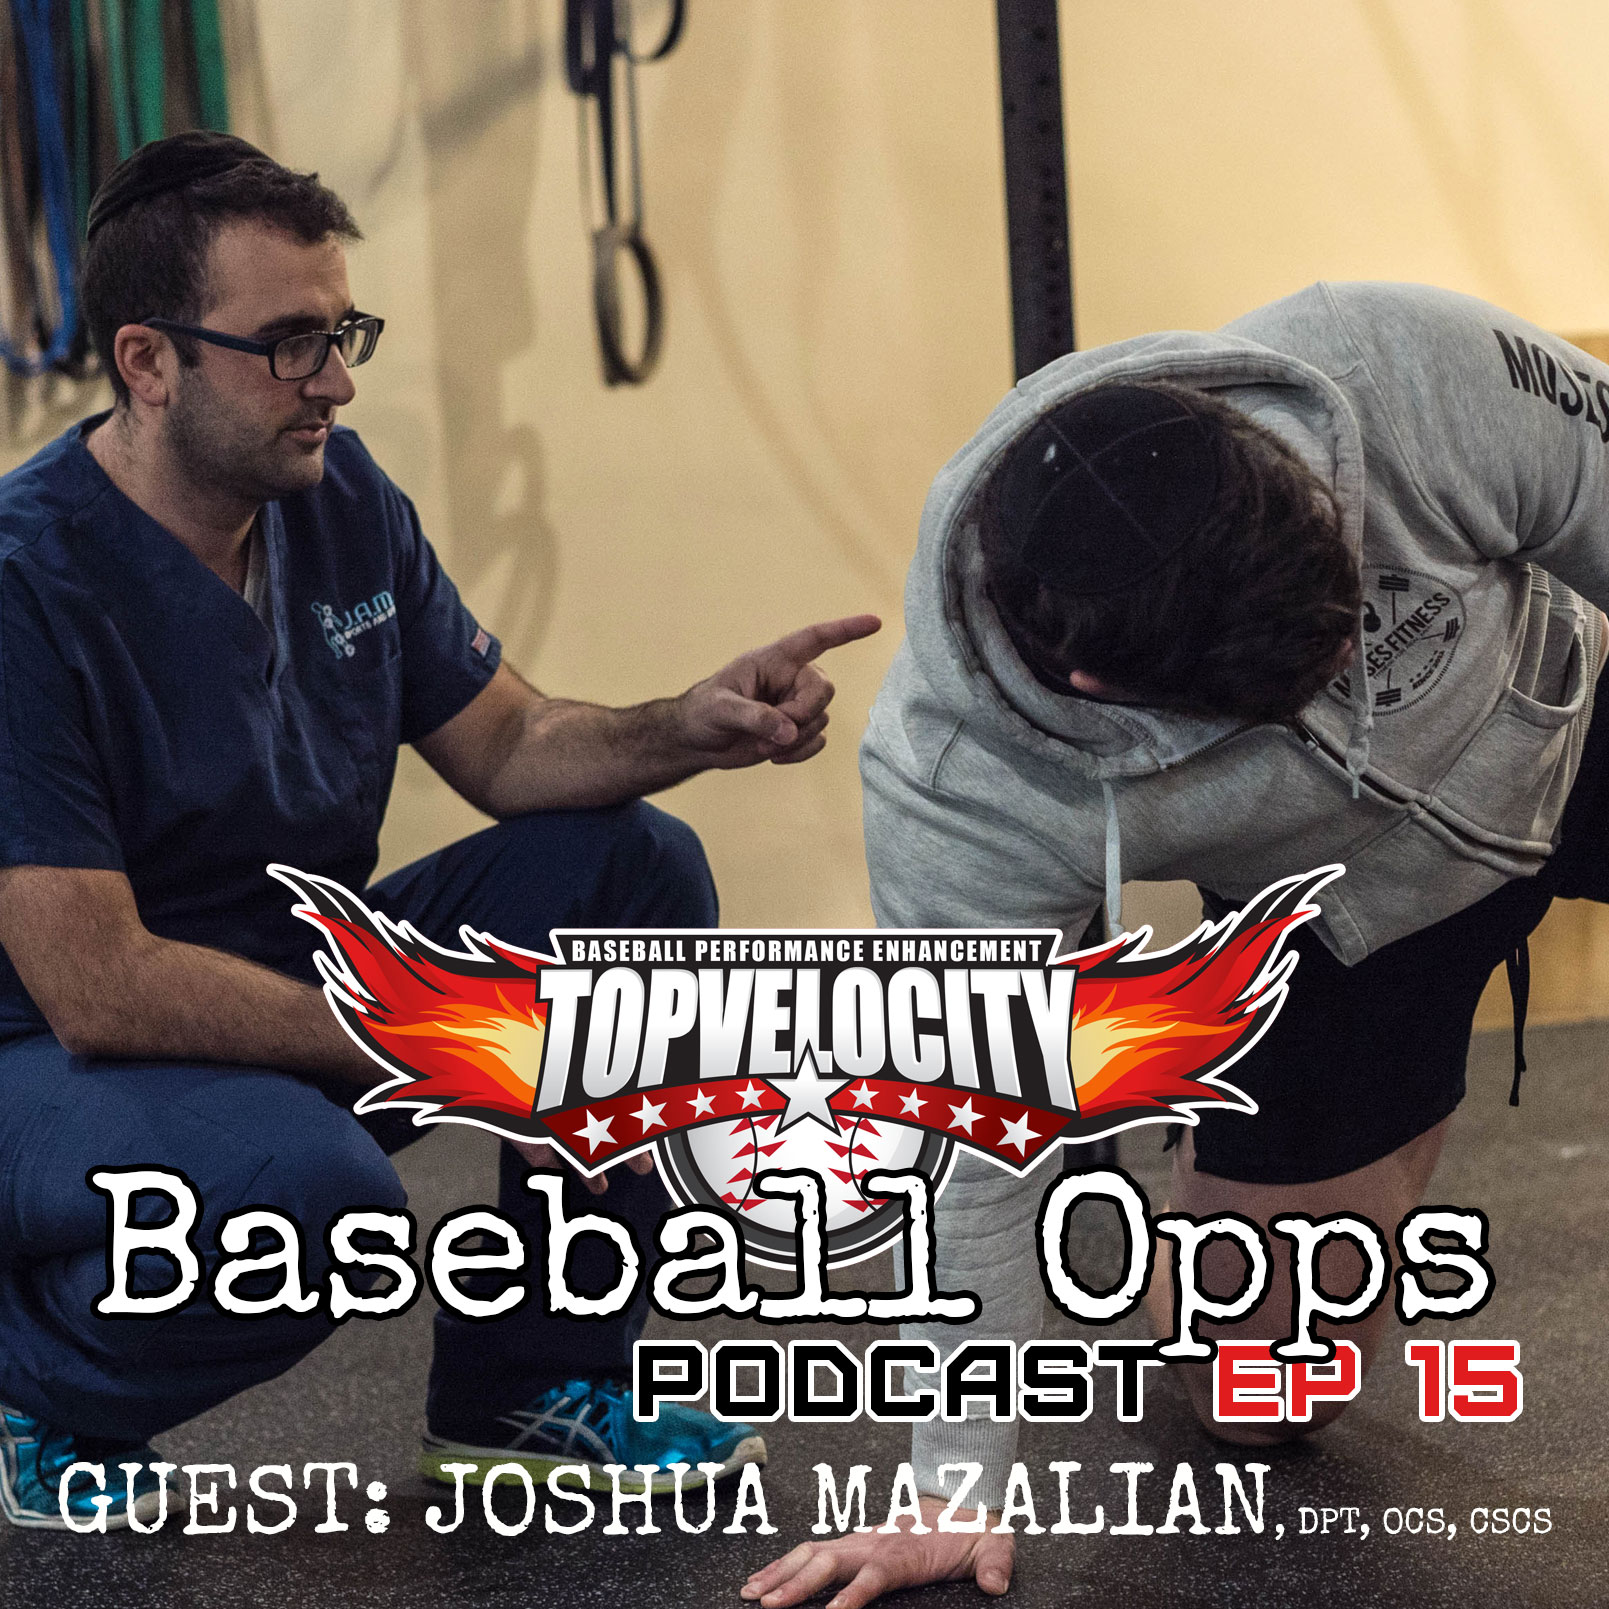 Importance of Hip Mobility and Stability to Baseball Injury with Dr. Mazalian on Baseball Opps with TopV